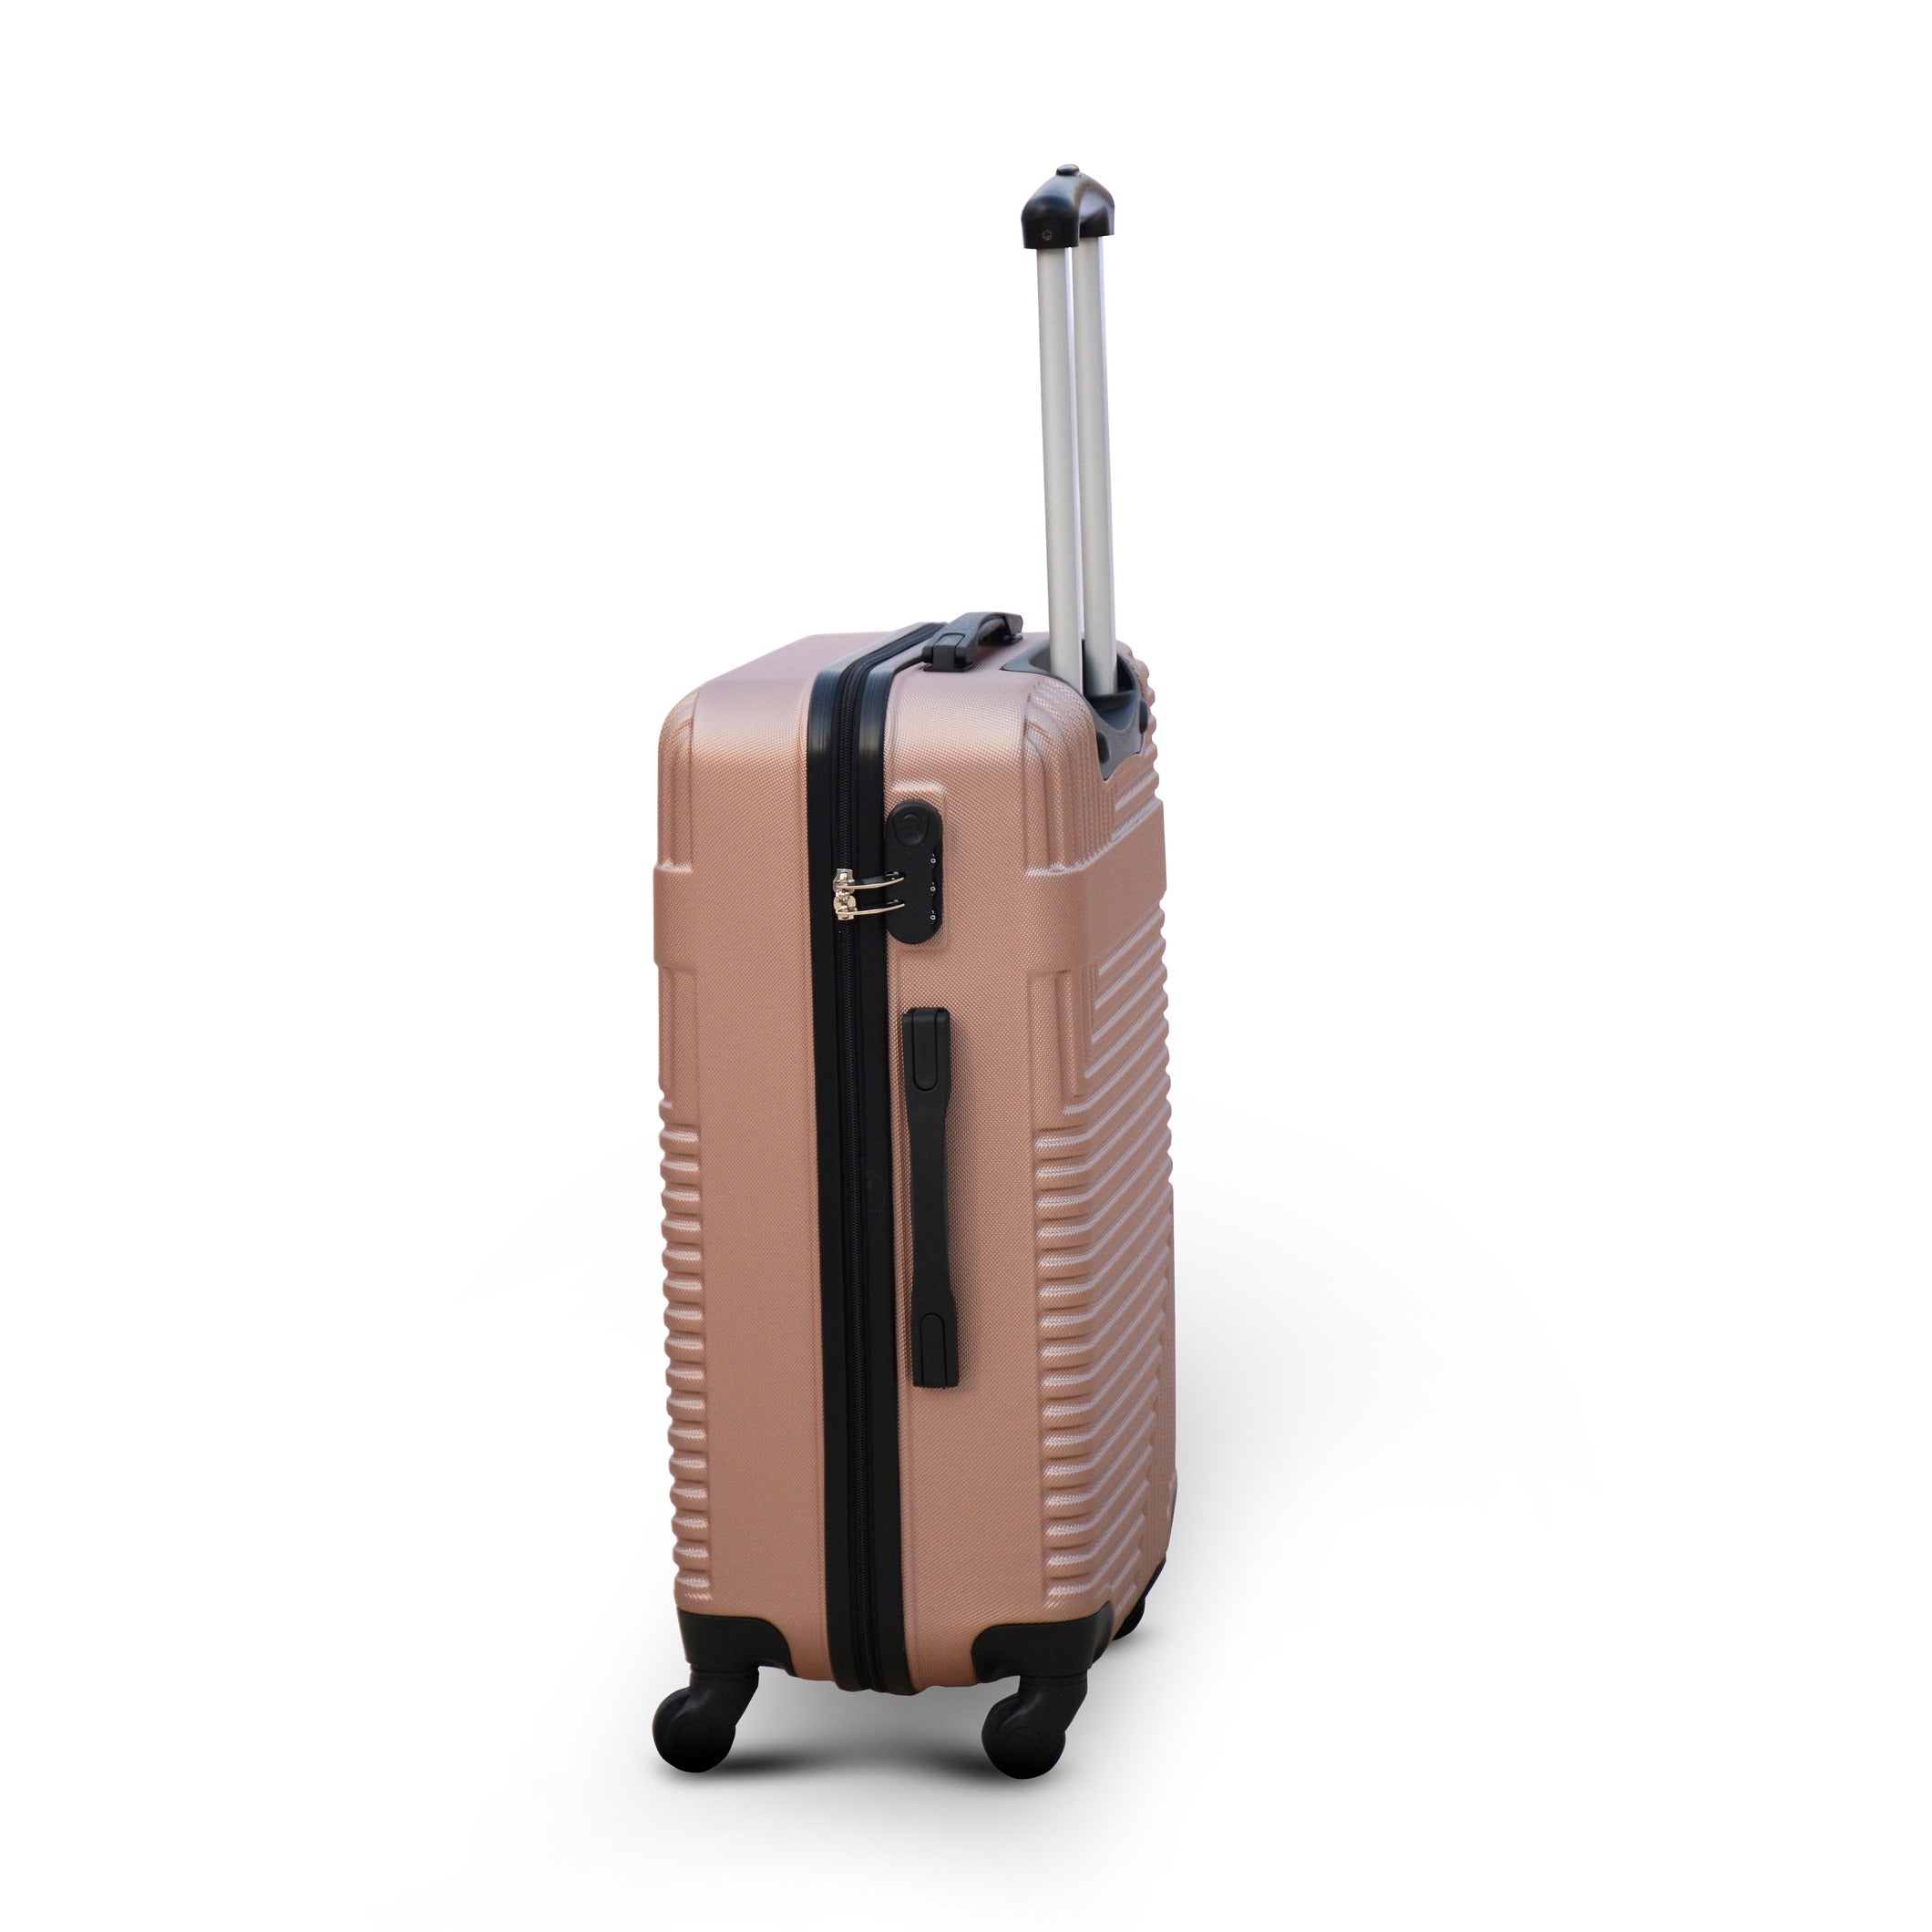 32" Rose Gold Colour Travel Way ABS Luggage Lightweight Hard Case Trolley Bag with Spinner Wheel